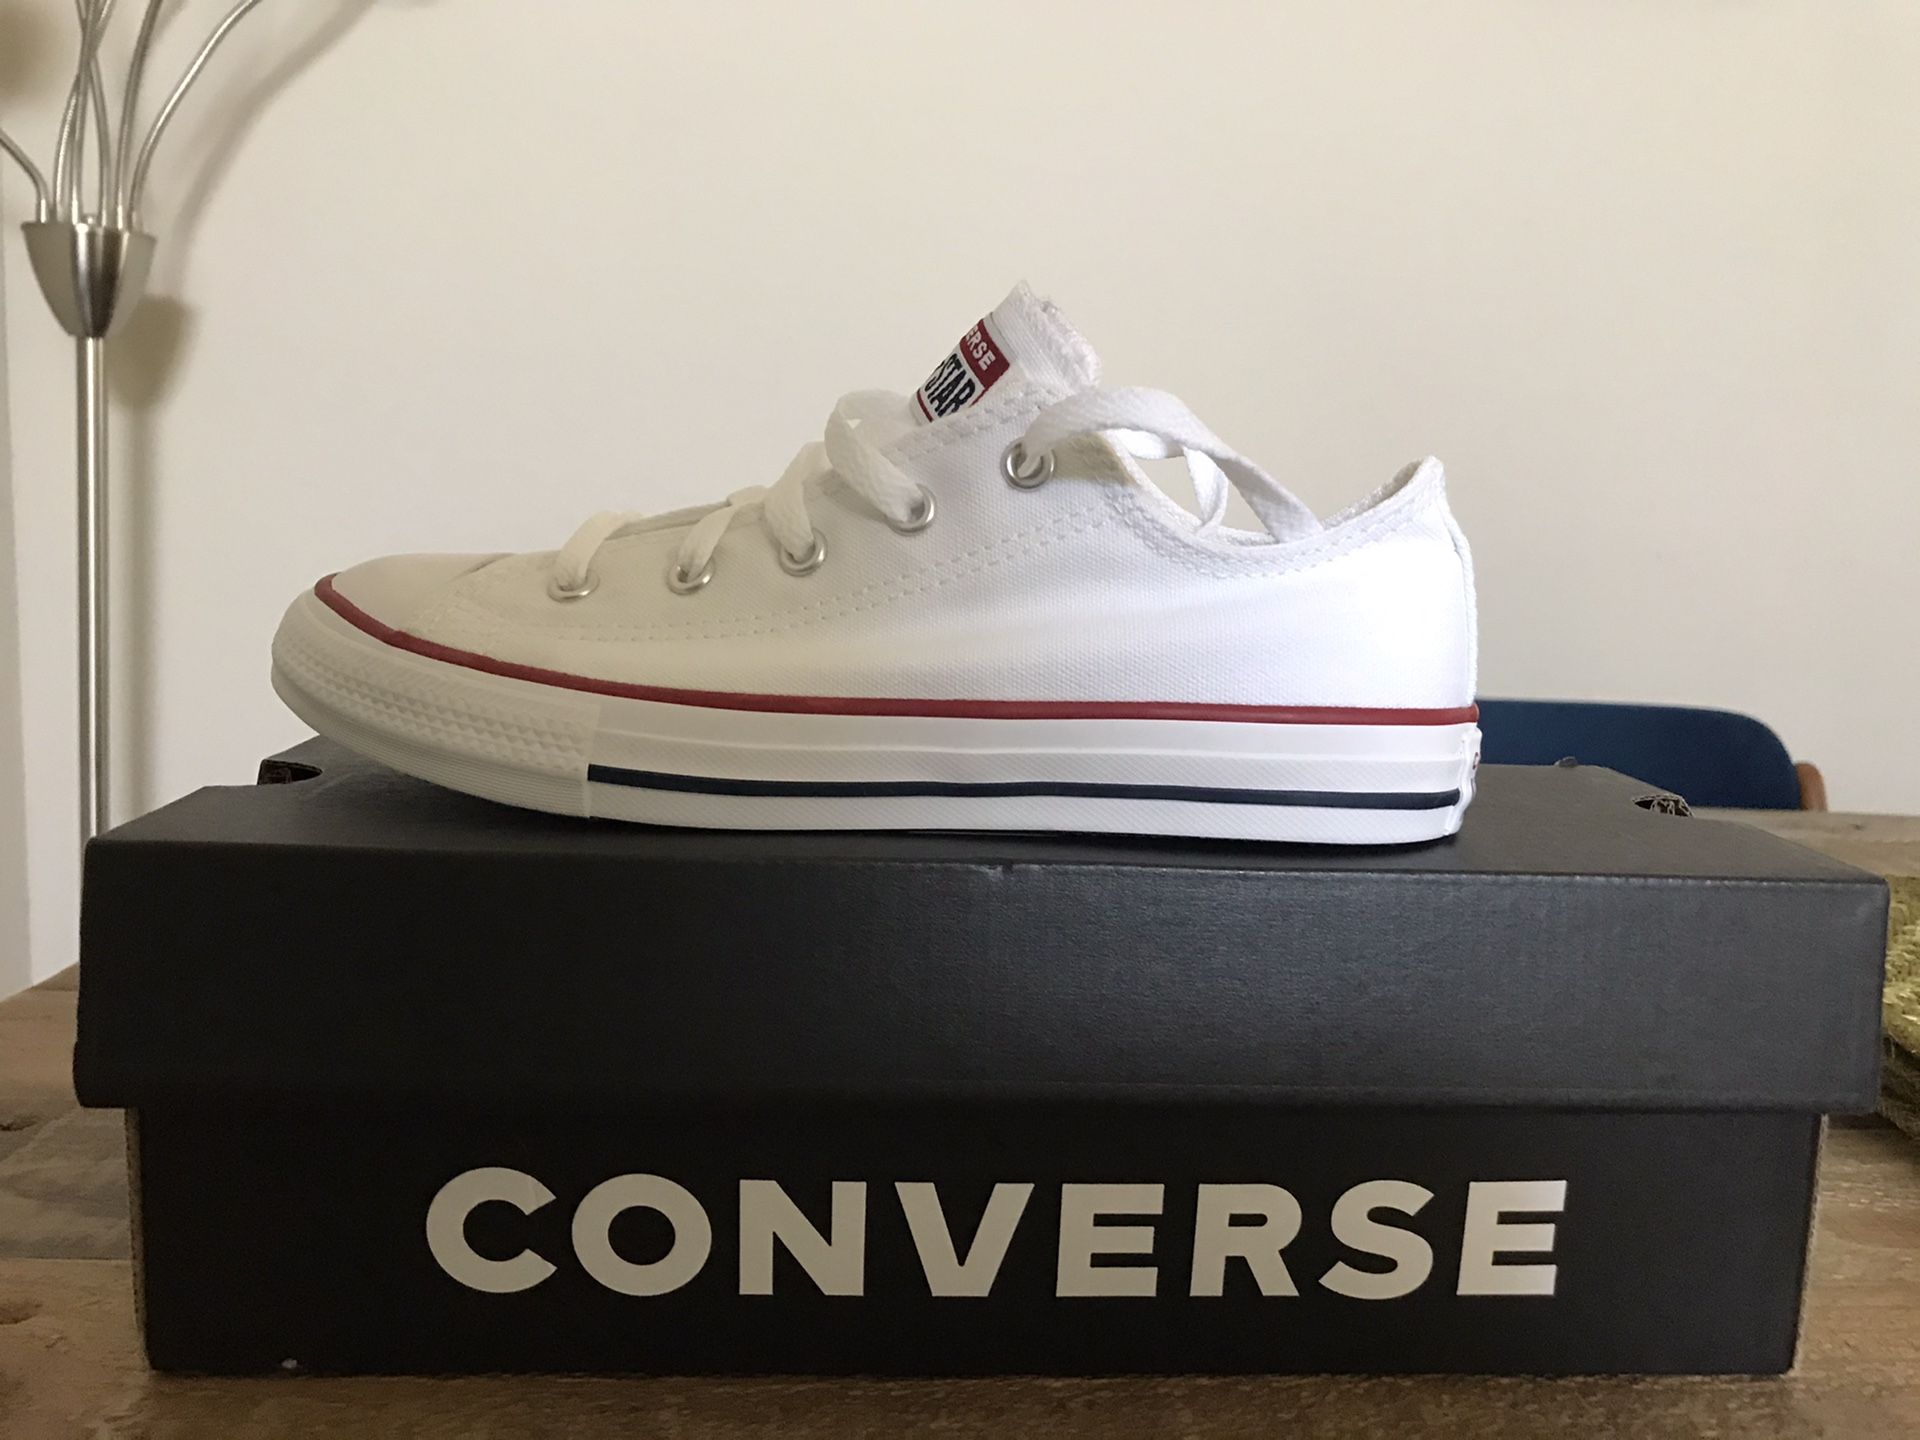 Converse youth size 3 ( fits a size 5.5 in adults). Model 3J256